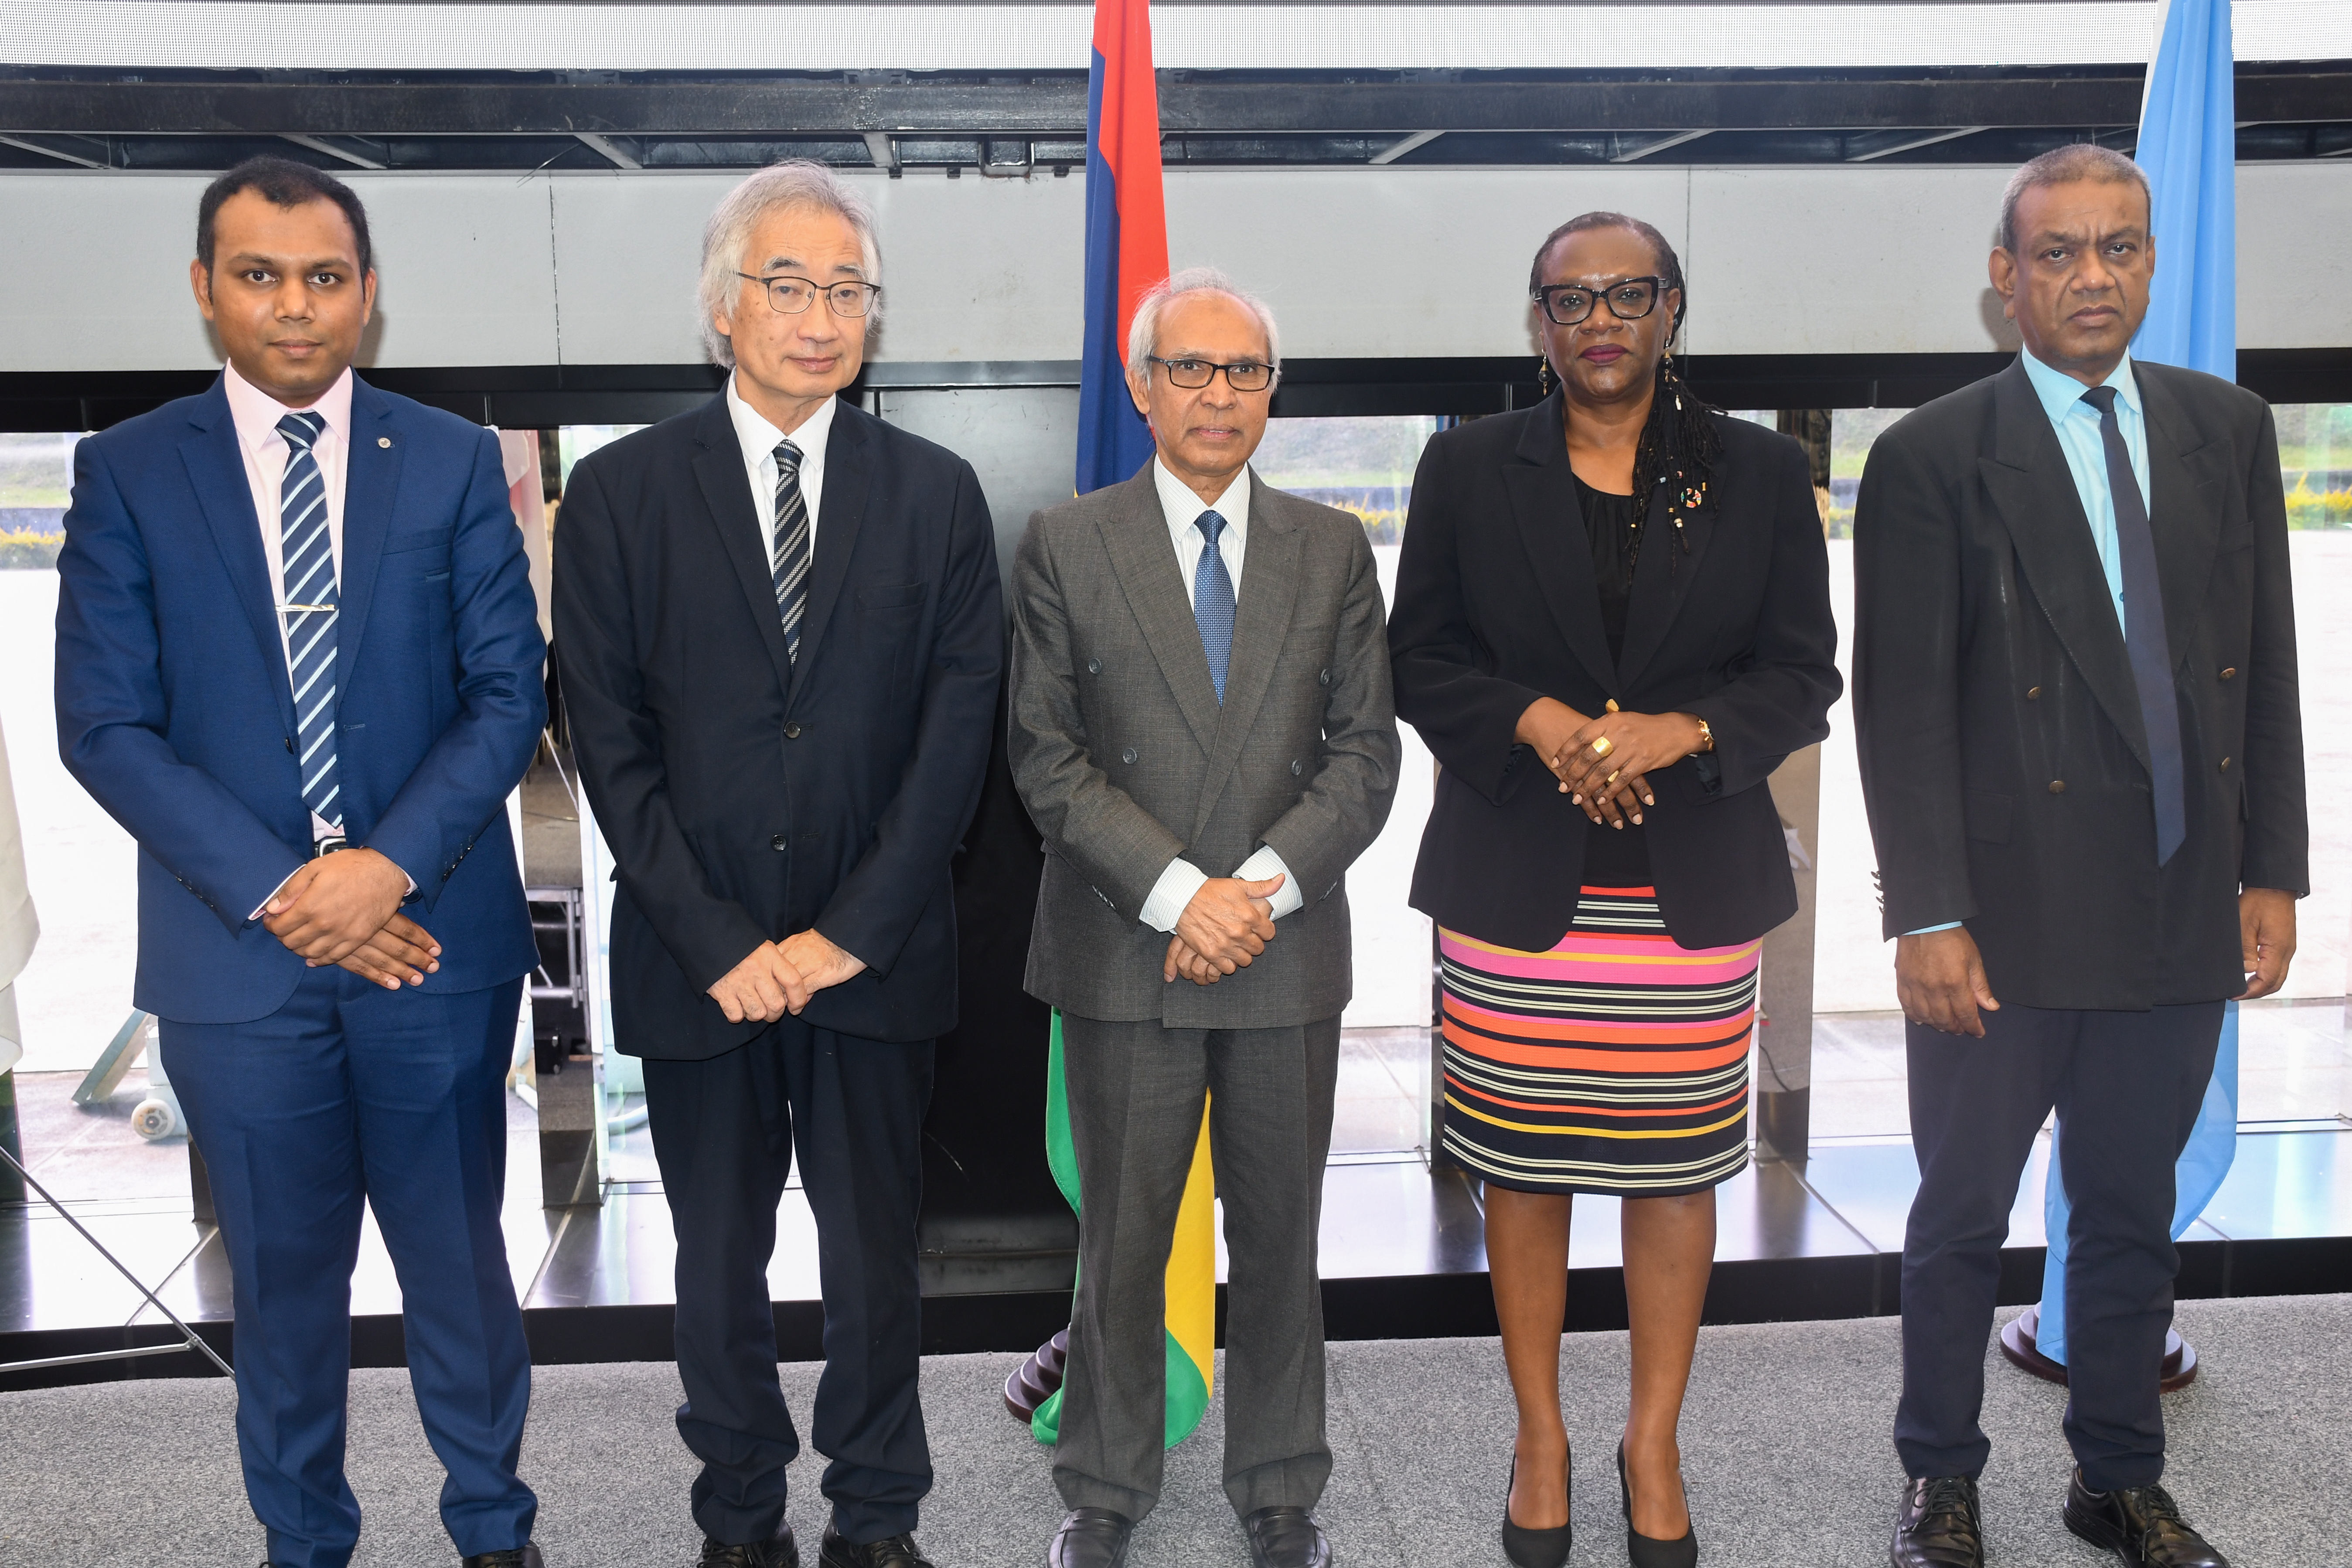 The event was launched by Dr the Honourable Anwar Husnoo, vice-Prime Minister and Minister of Local Government and Disaster Risk Management in the presence of His Excellency Mr. Shuichiro Kawaguchi, the Ambassador of Japan to Mauritius, and Ms. Amanda Serumaga, UNDP Resident Representative for Mauritius and Seychelles